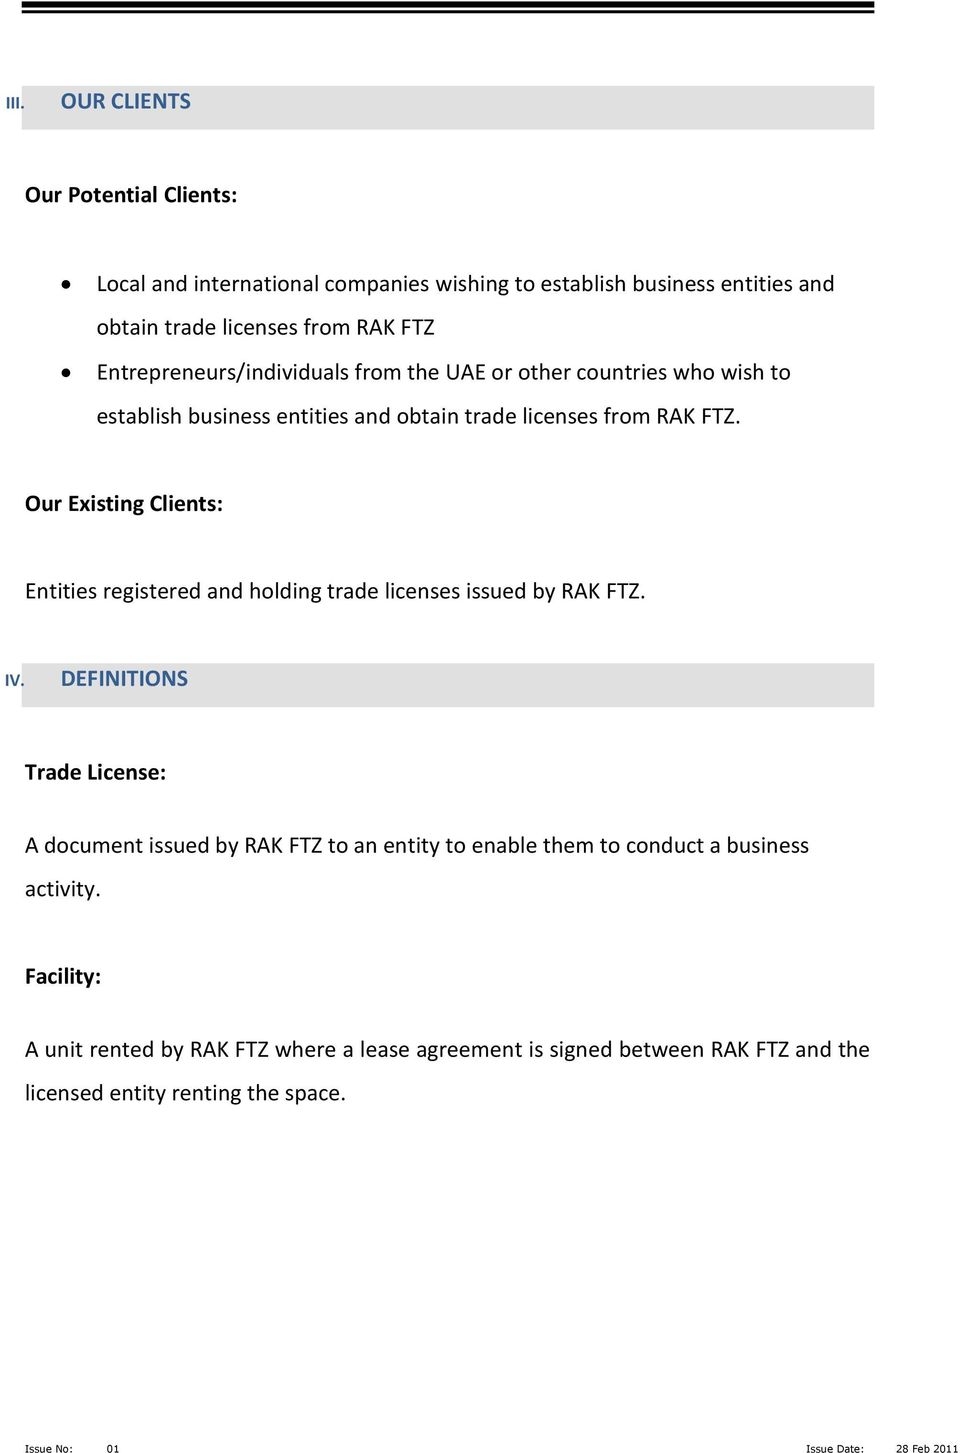 Our Existing Clients: Entities registered and holding trade licenses issued by RAK FTZ. IV.